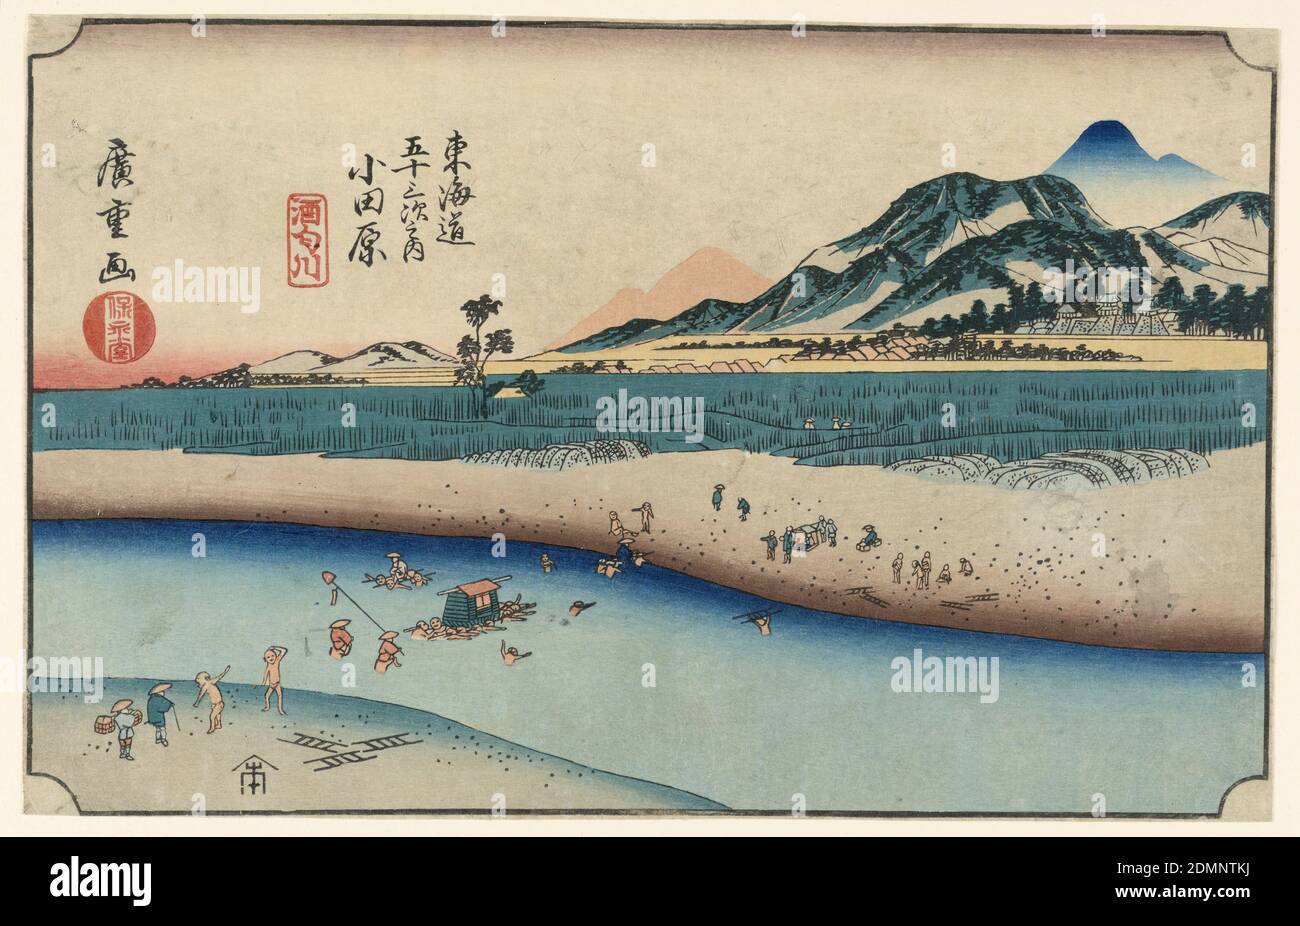 Woodblock from Tokaido Gojusan Tsugi-na Uchi (Fifty-Three Stations on the Tokaido), Ando Hiroshige, Japanese, 1797–1858, Woodblock print (ukiyo-e) on mulberry paper (washi), View of river with mountains on right; farmers working across the river and rice fields in the middle distance., Japan, 19th century, landscapes, Print Stock Photo